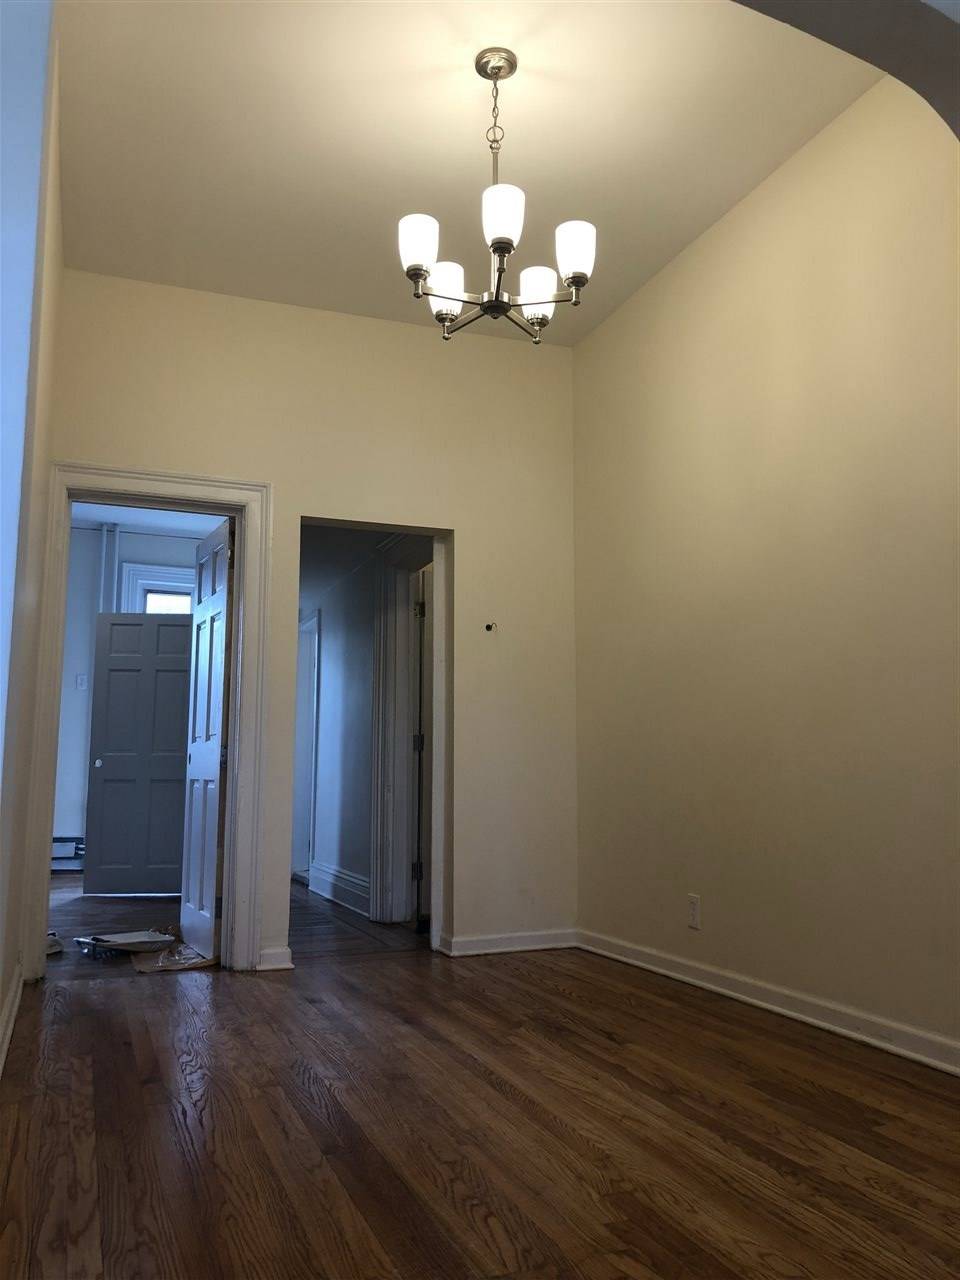 Fully renovated modern 2 bedroom - 2 BR New Jersey